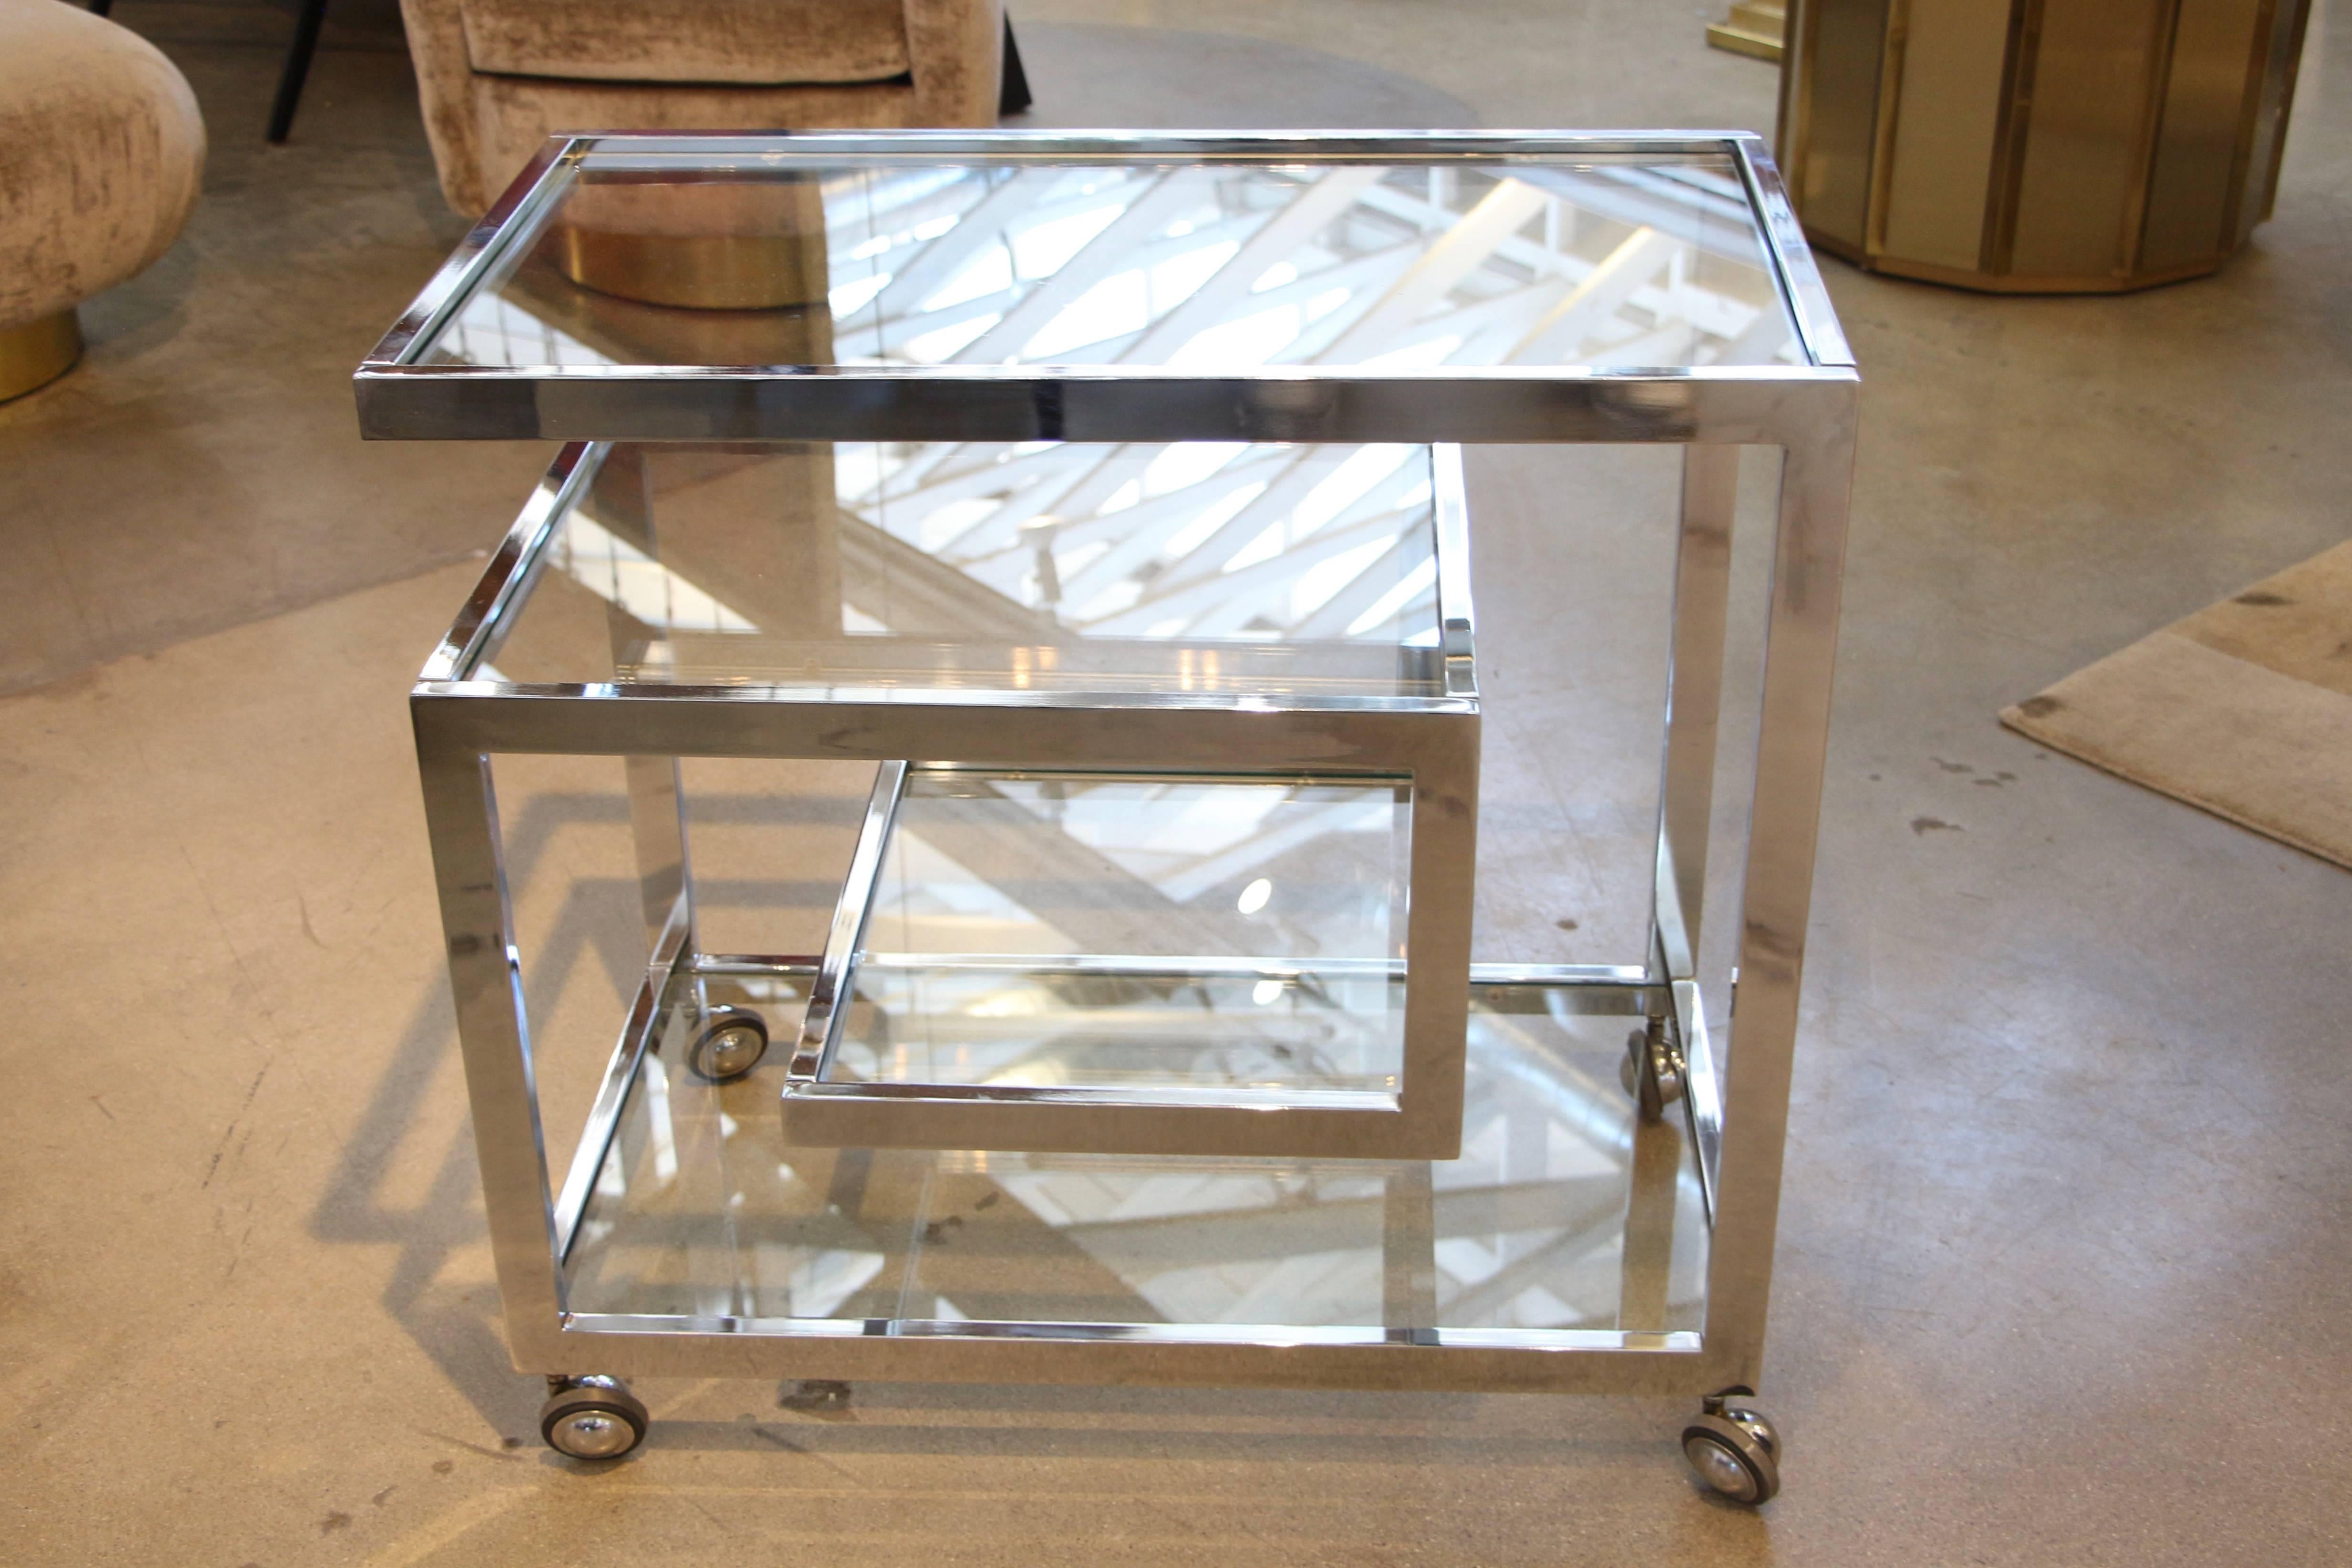 A beautiful Milo Baughman designed chrome bar cart on casters. A very elegant design in great condition for it's age.